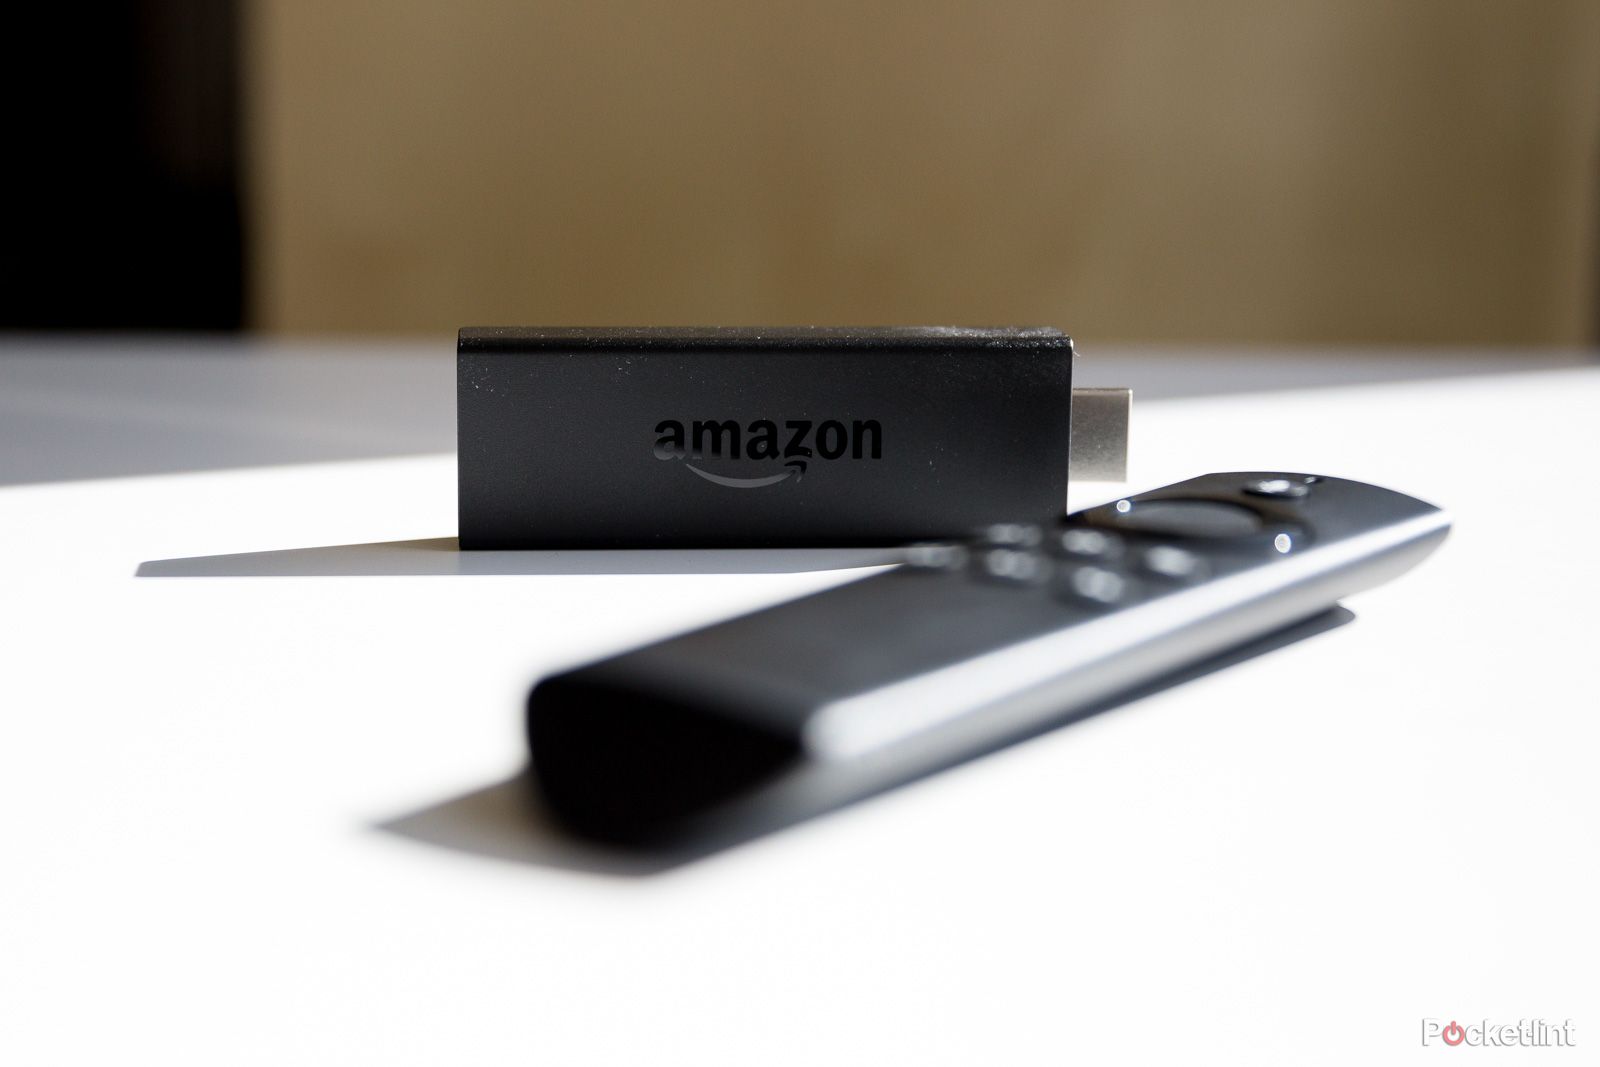 How to install a VPN on an Amazon Fire TV Stick or Fire TV image 1